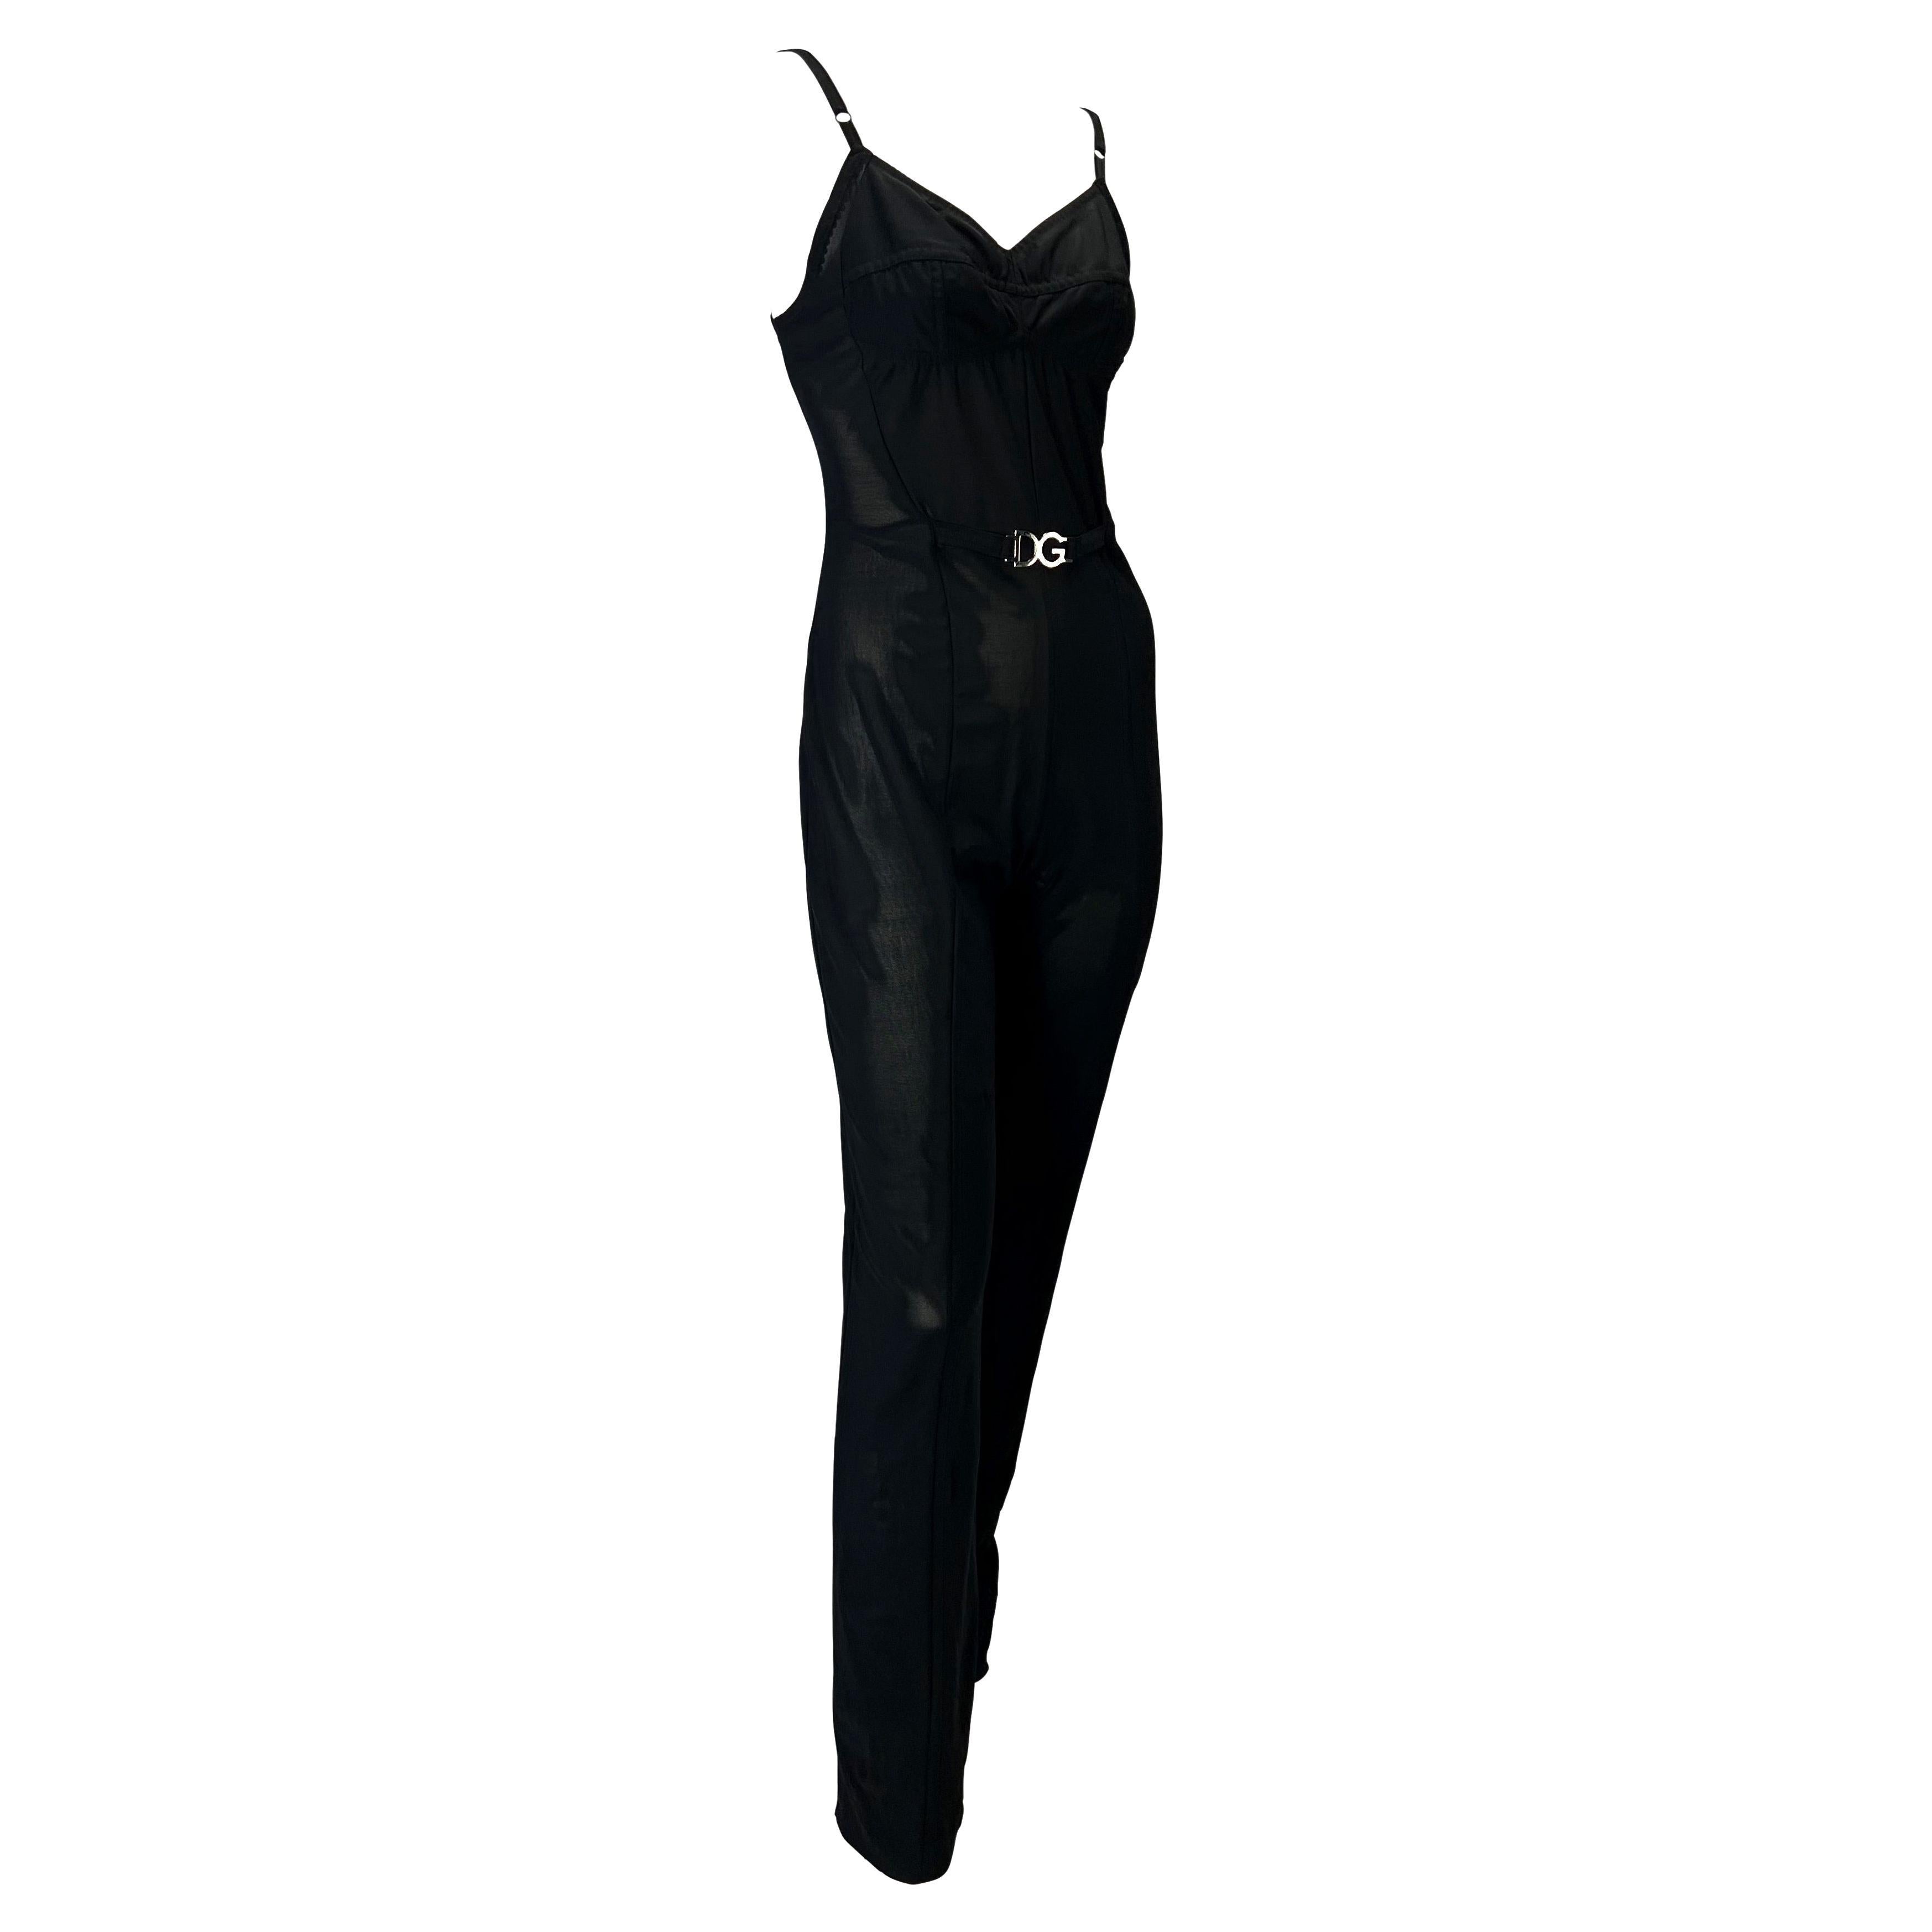 Mid 1990s Dolce & Gabbana Logo Black Bustier Corset Sheer Stretch Catsuit  In Good Condition For Sale In West Hollywood, CA